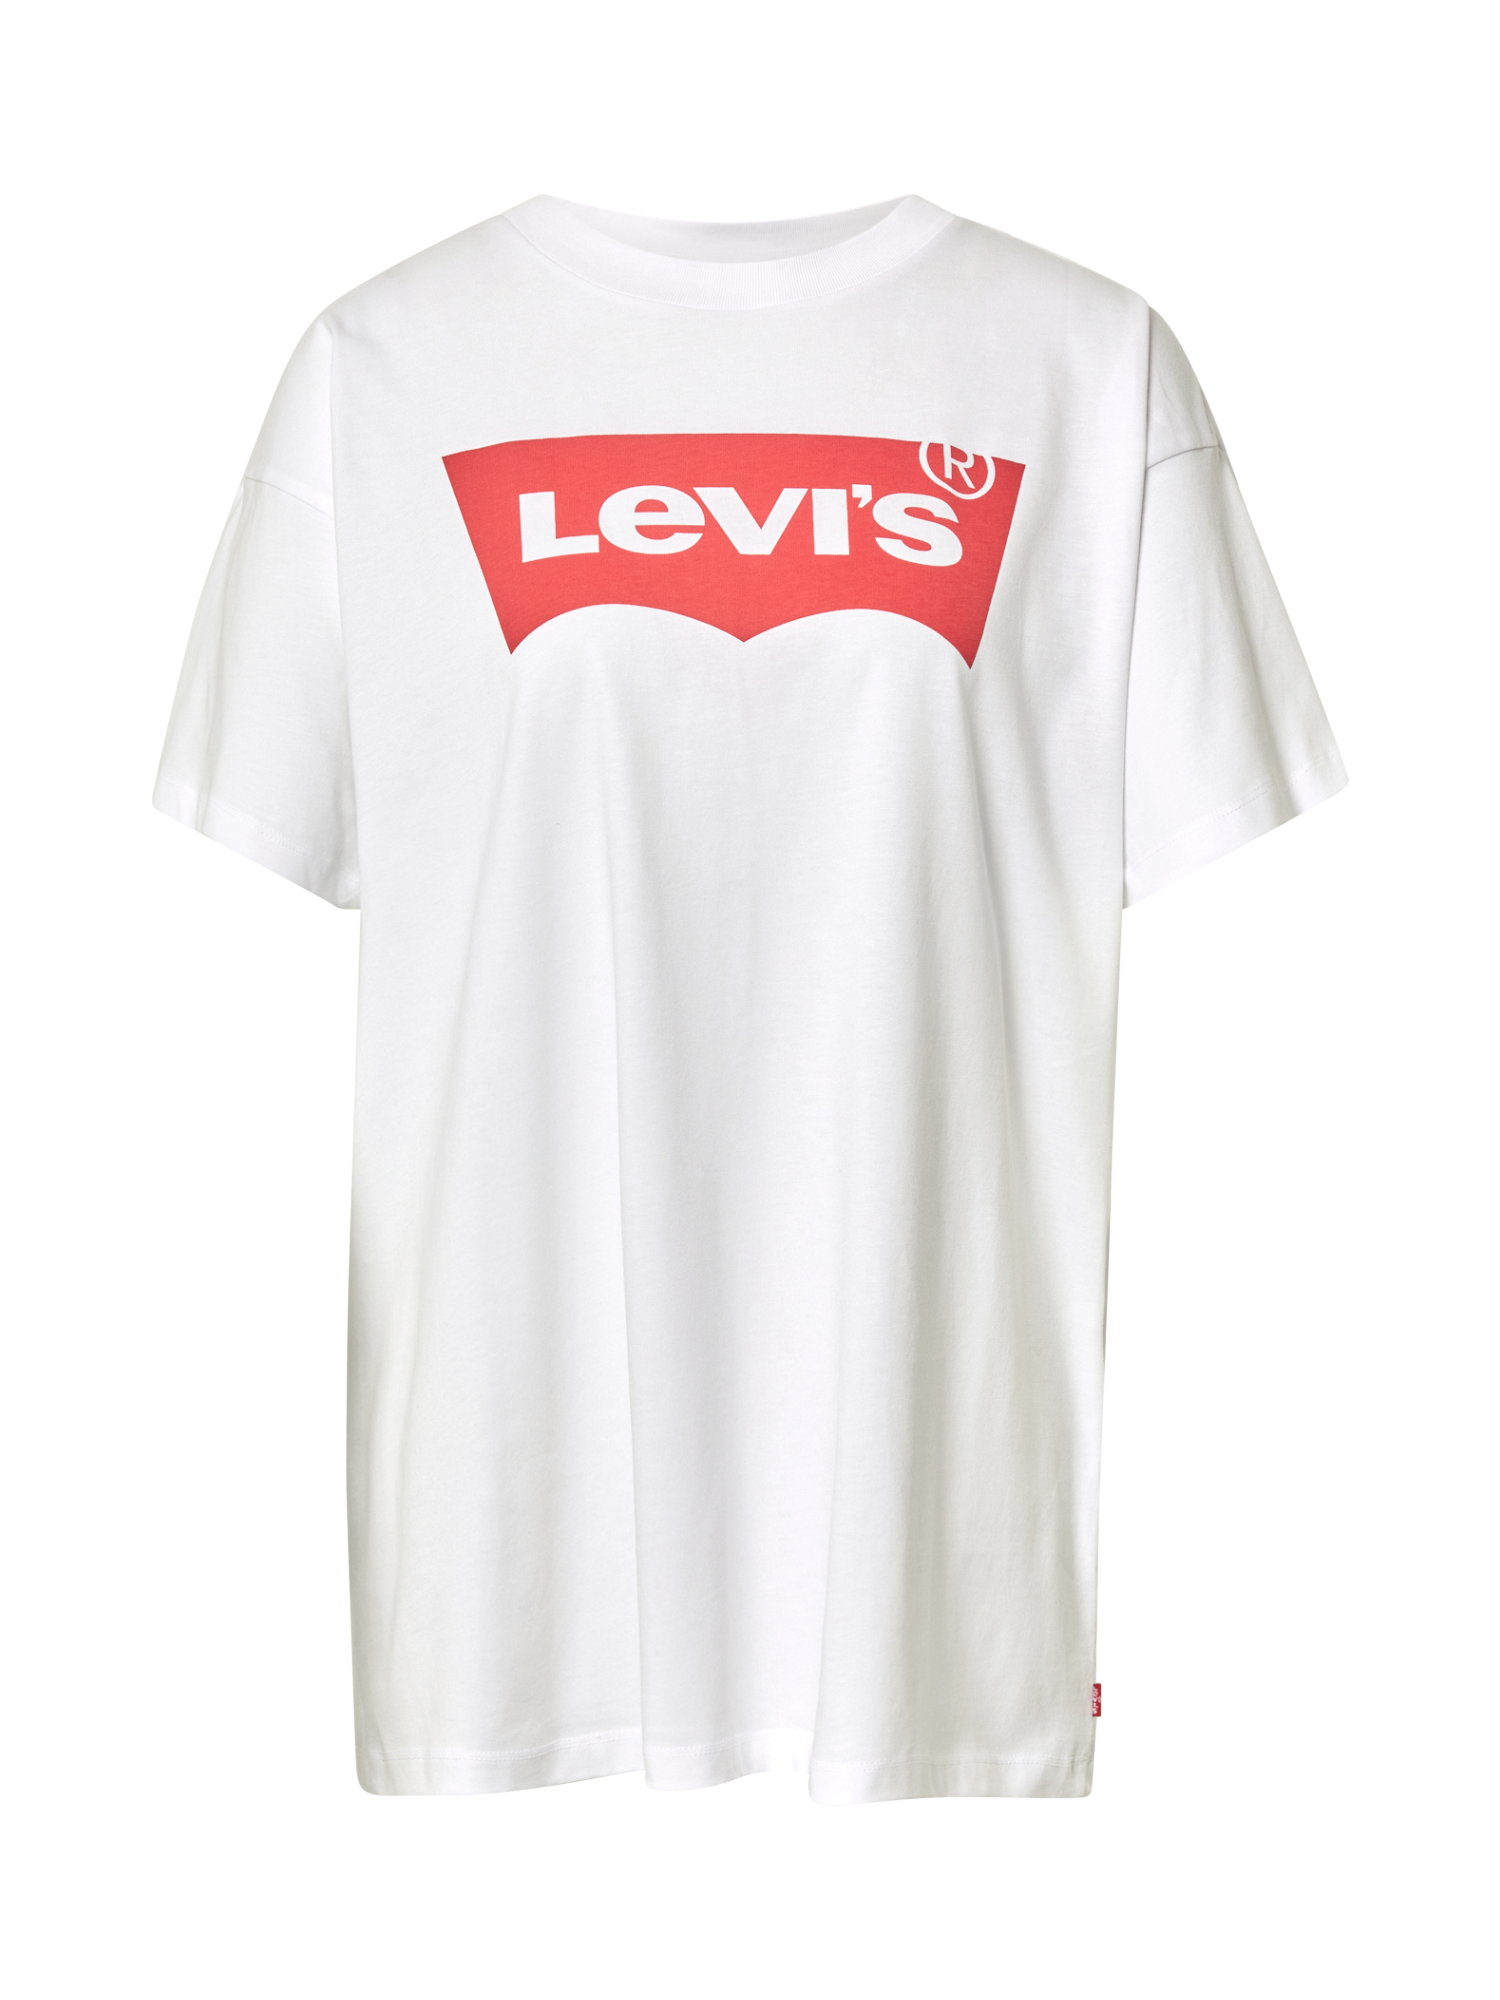 Donna Maglie e top LEVIS Maglia extra large in Bianco 